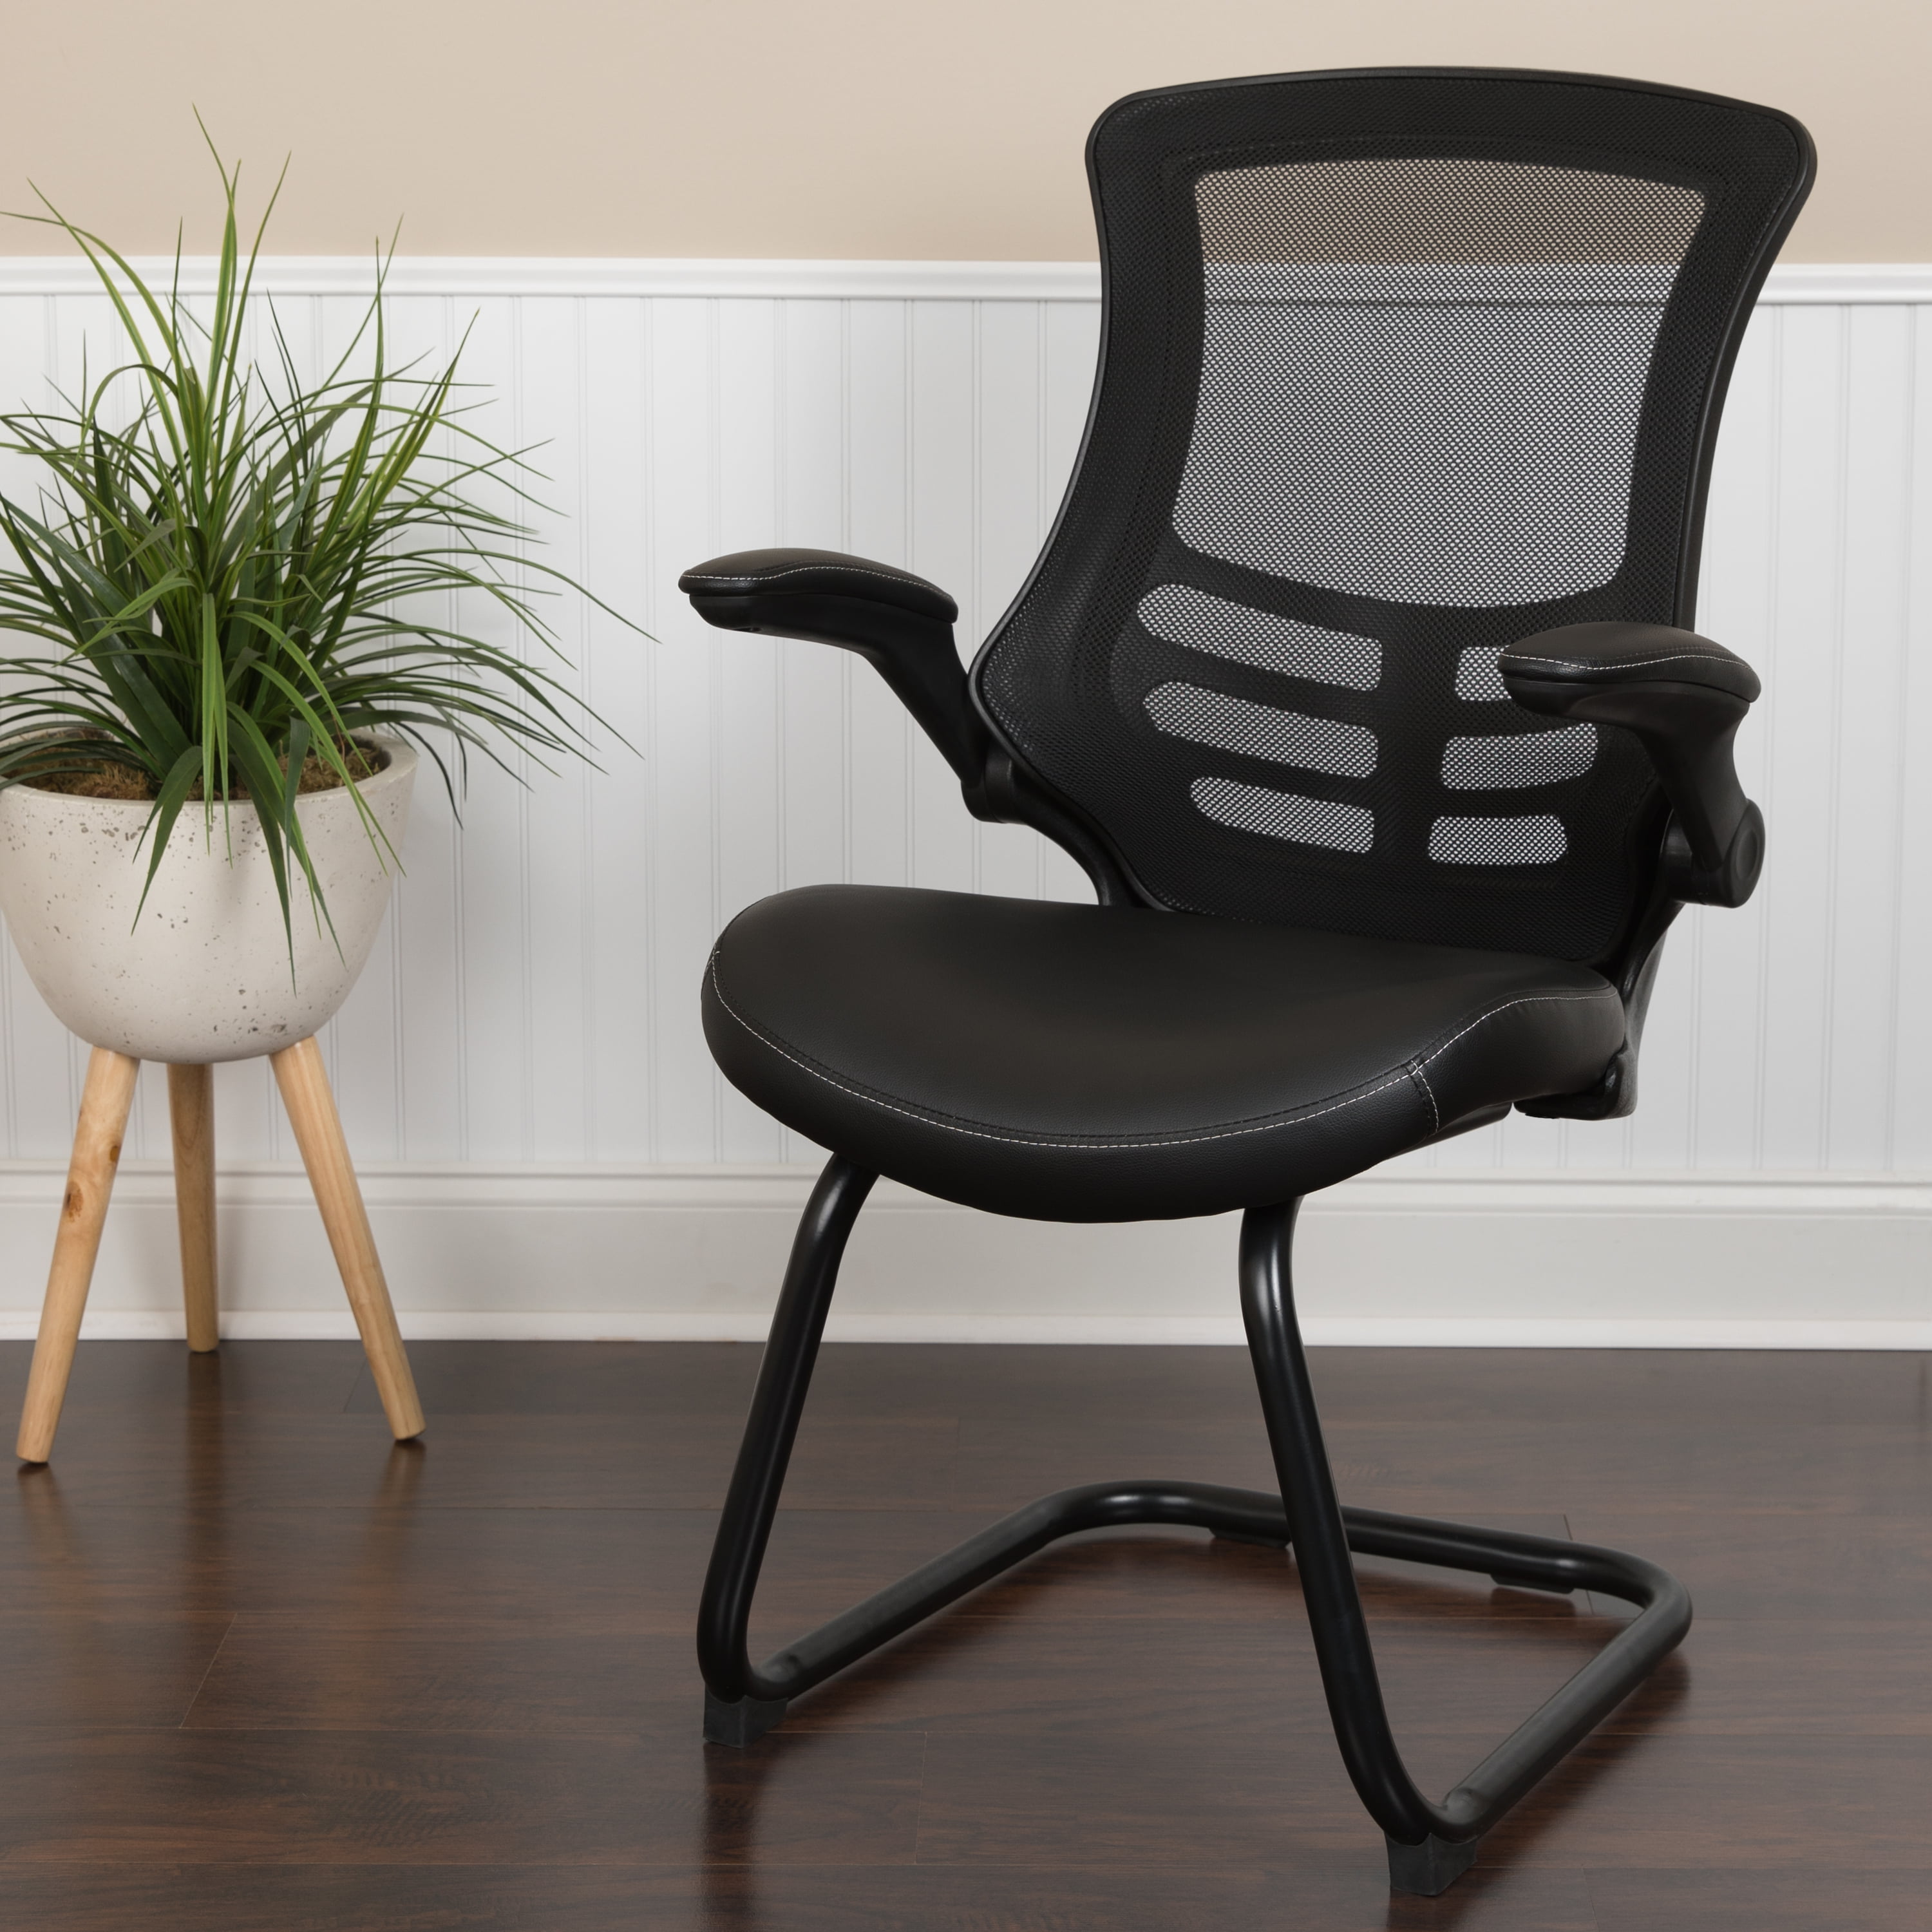 OLIVER Black Mesh Sled Base Side Reception Chair with LeatherSoft Seat and Flip-Up Arms EMMA 